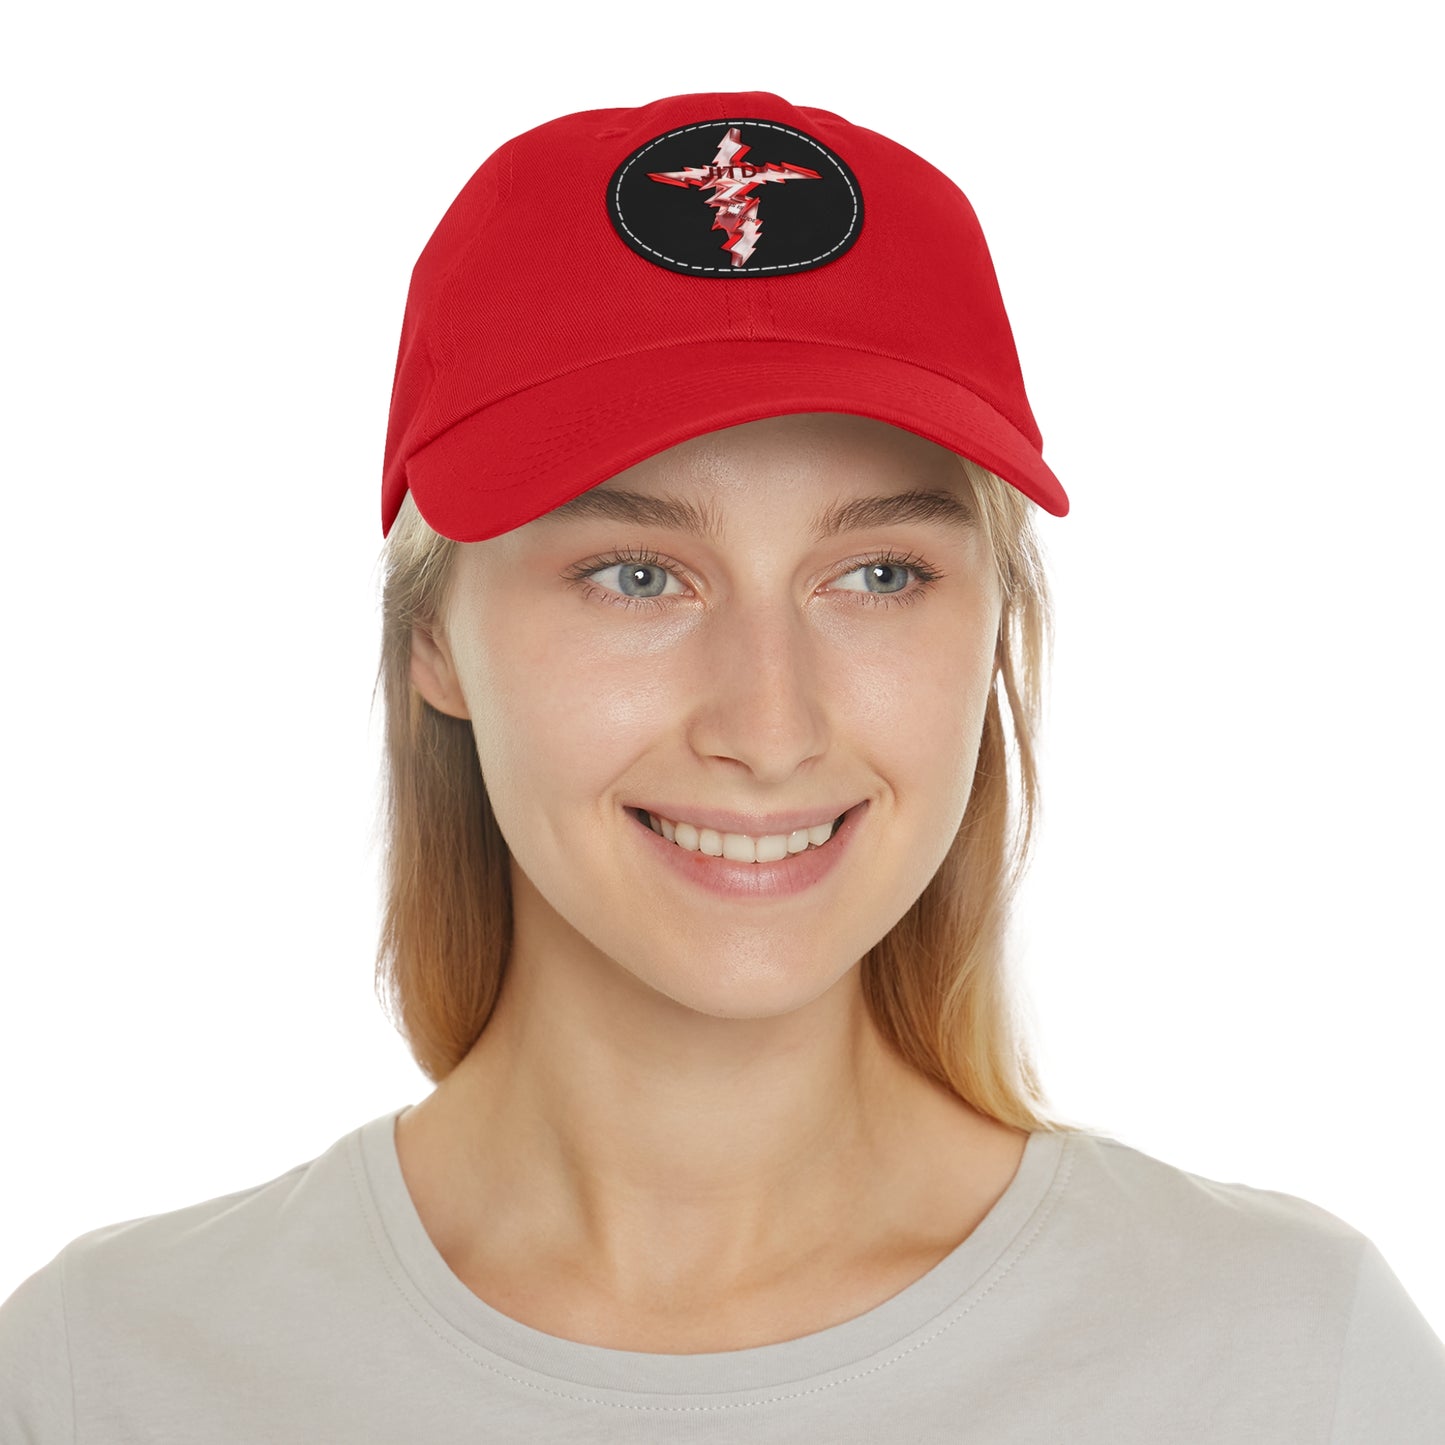 JITD BOLT CROSS HAT WITH LEATHER PATCH